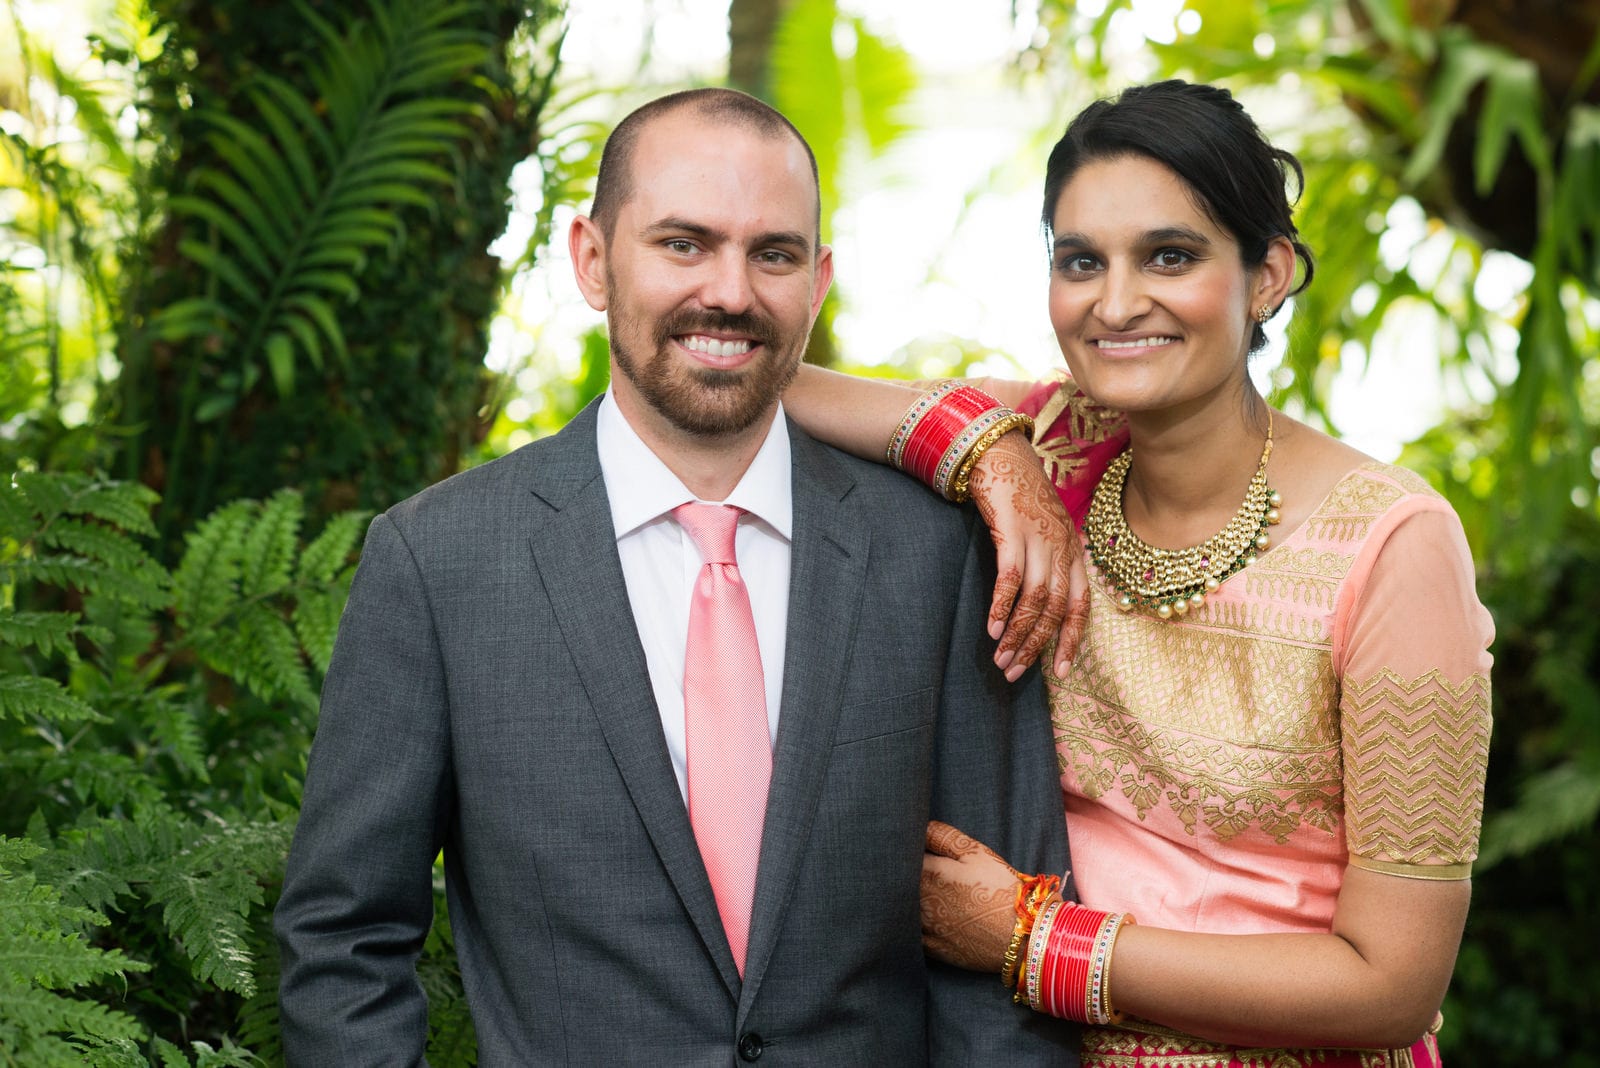 A bride in a gold sari rests her arm on her grooms shoulder. He's wearing a gray suit with a pink tie during their Renaissance Phipps South Asian Wedding.